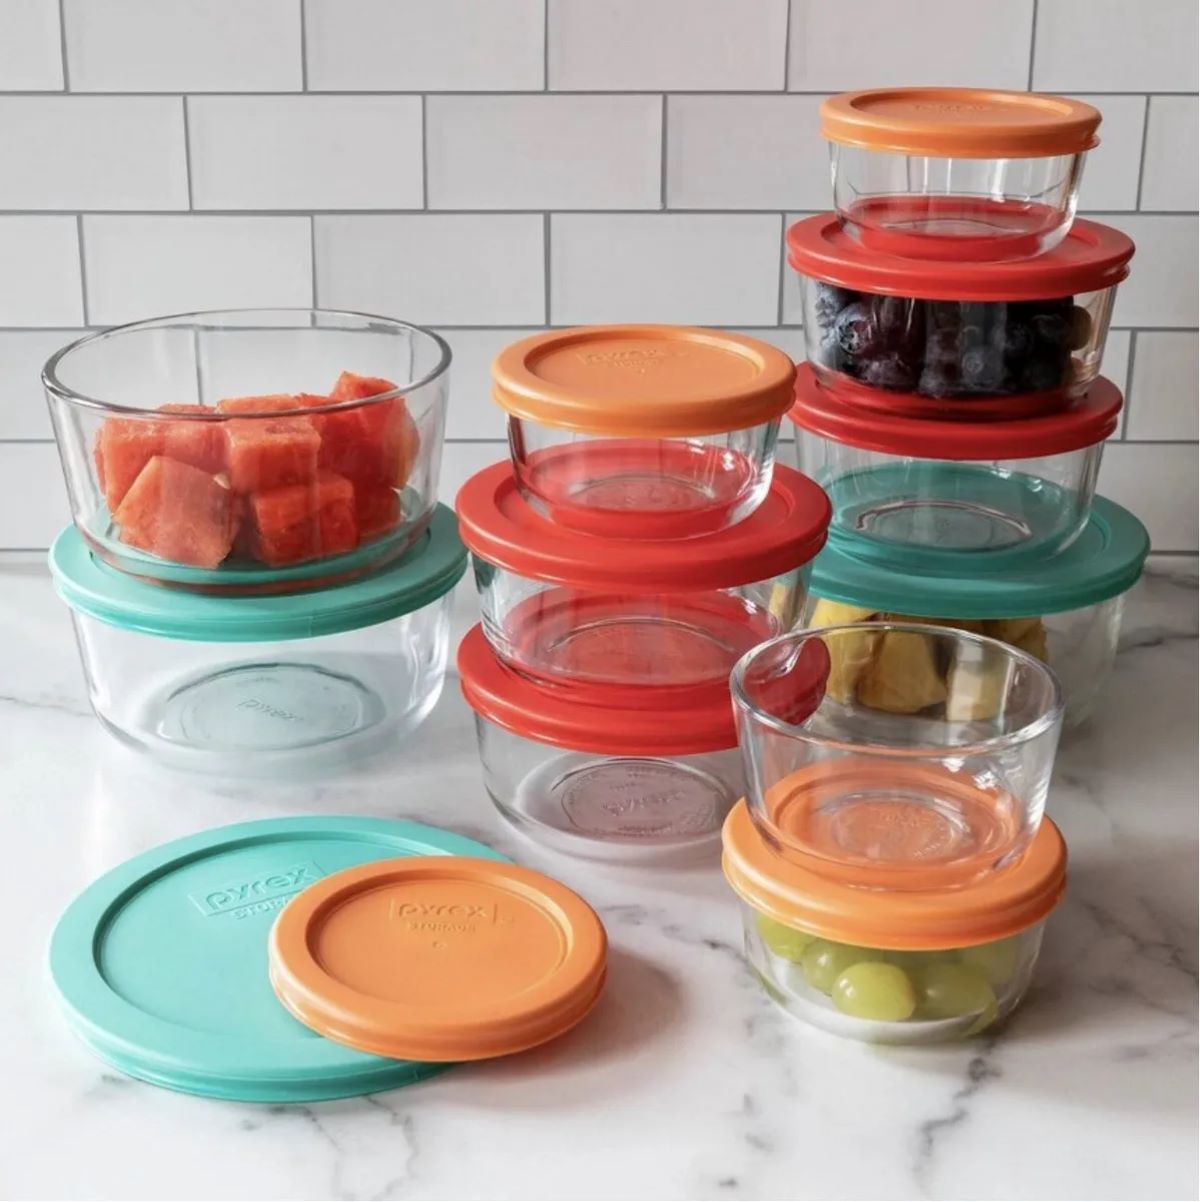 How To Store Pyrex Containers